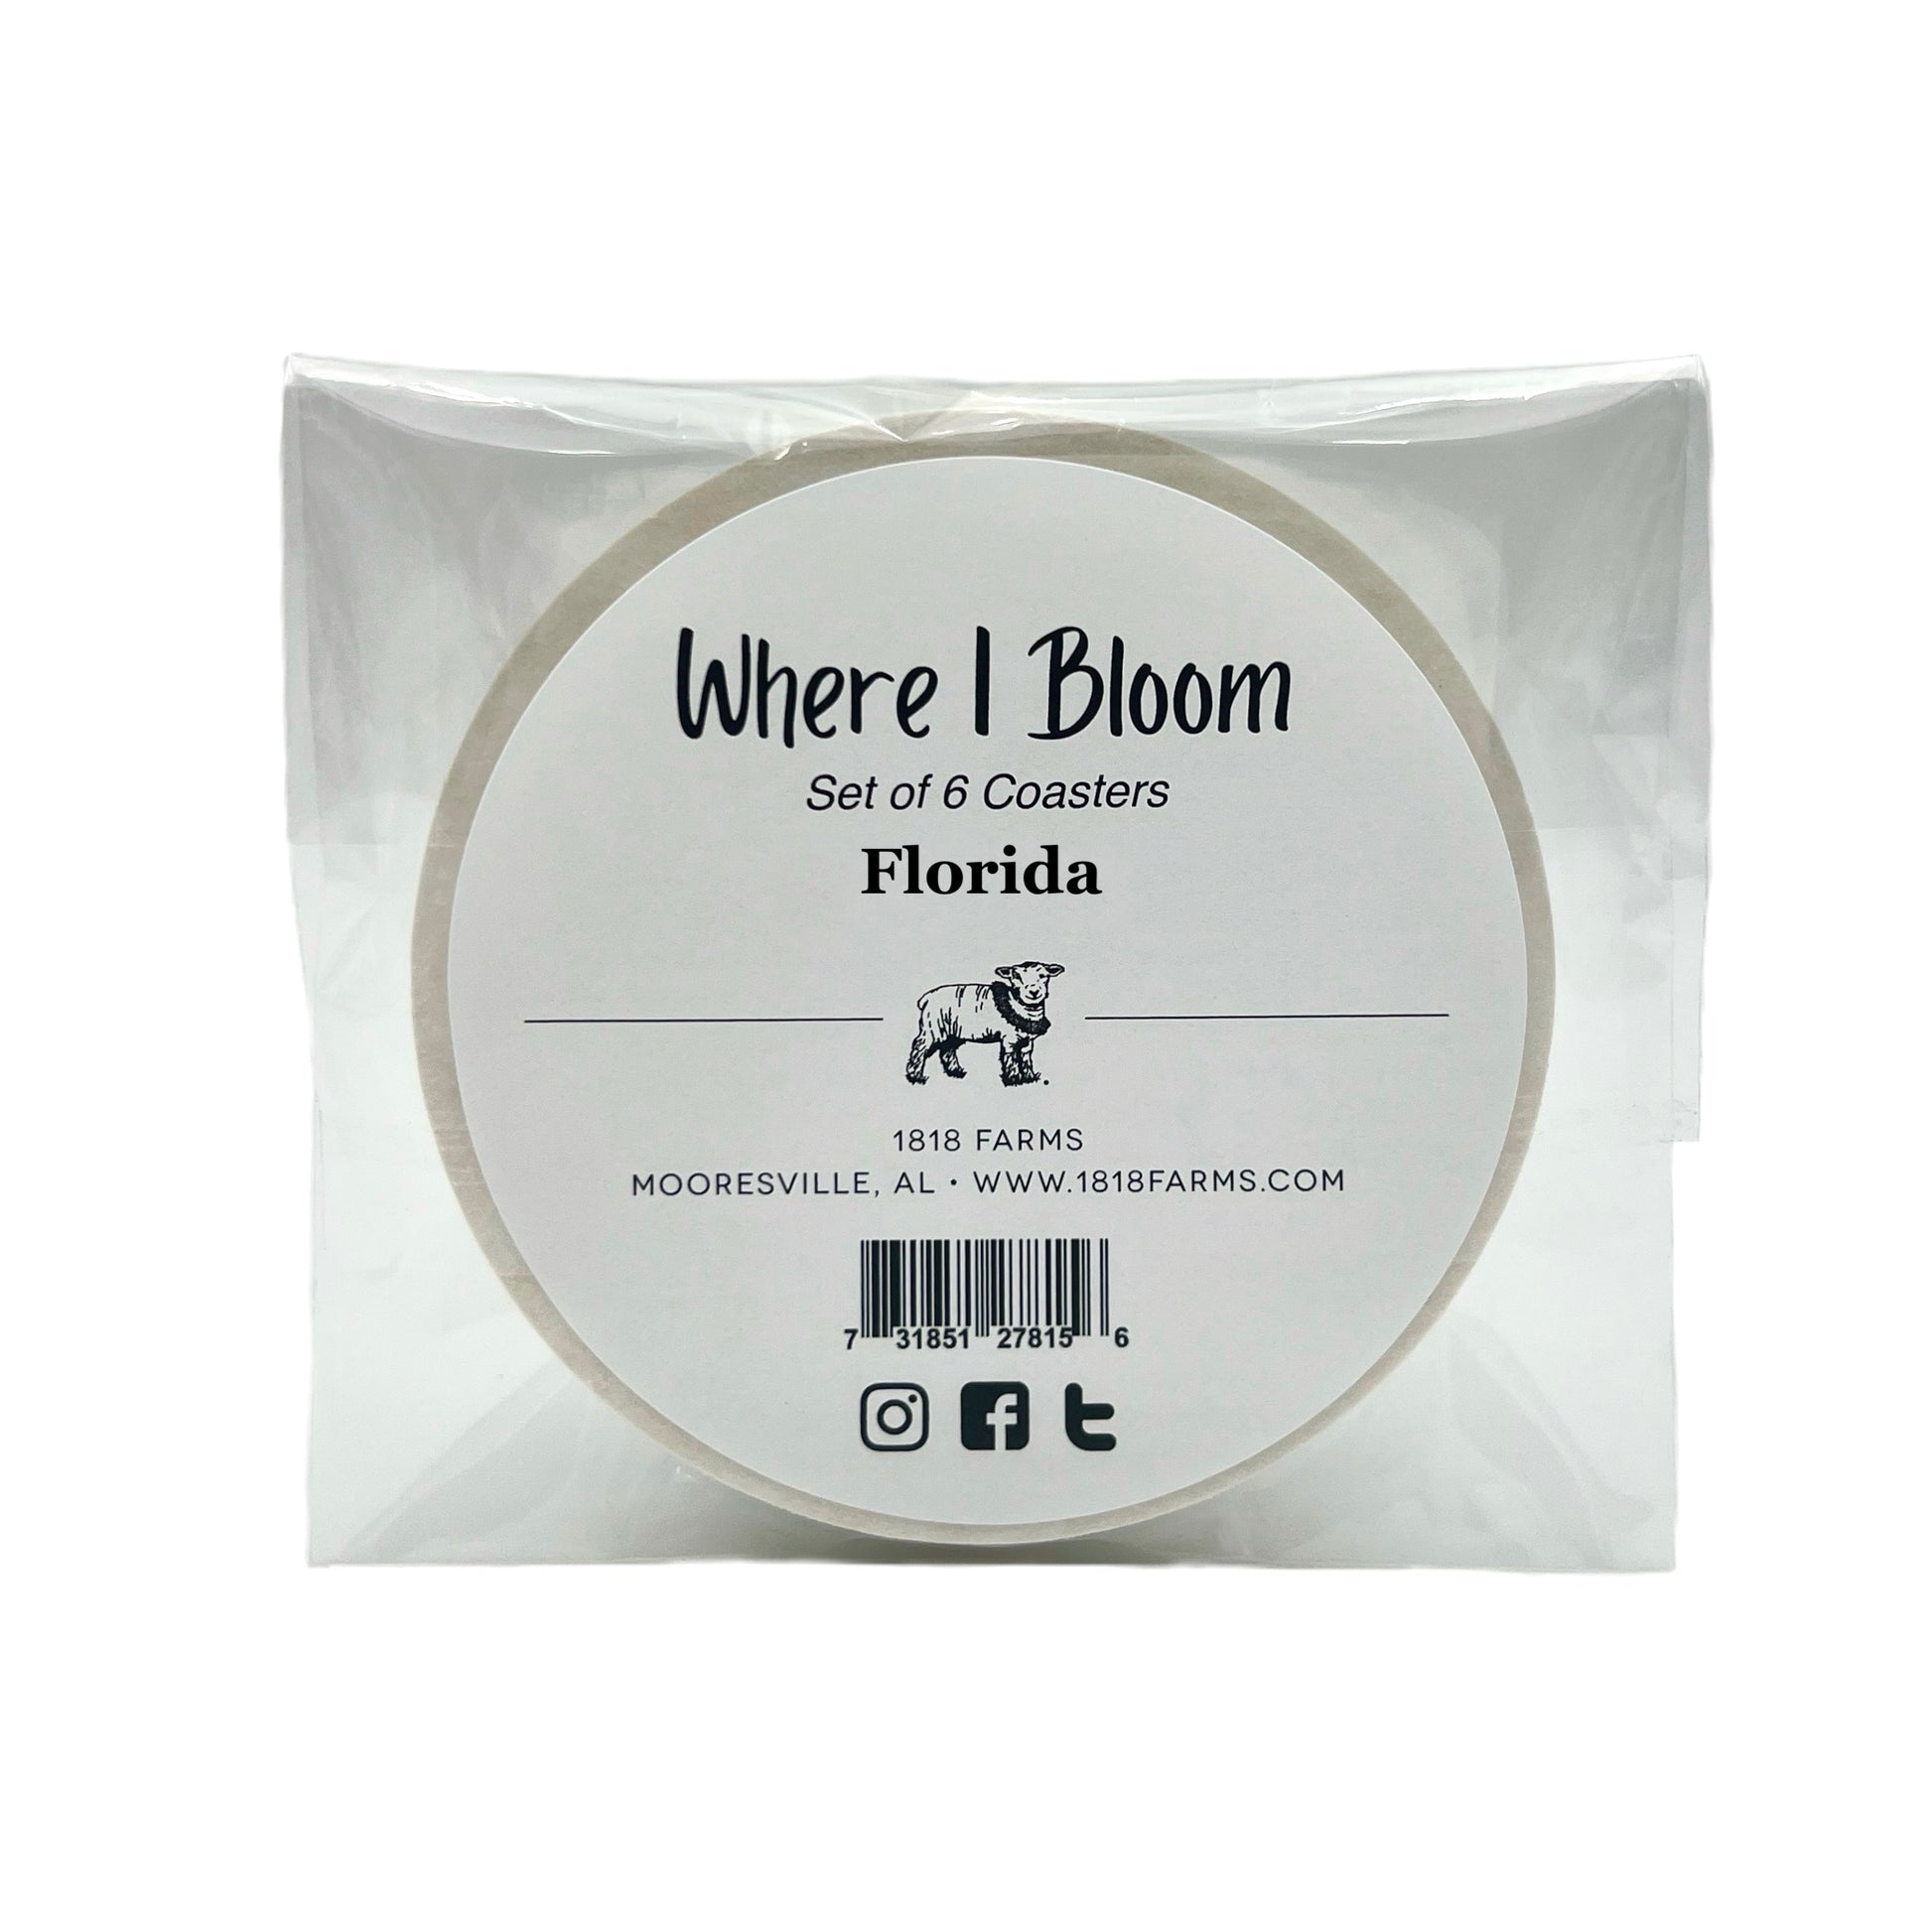 Florida Themed Coasters (Set of 6) Featuring Dried, Pressed Flowers - "Where I Bloom" Collection Coaster 1818 Farms   